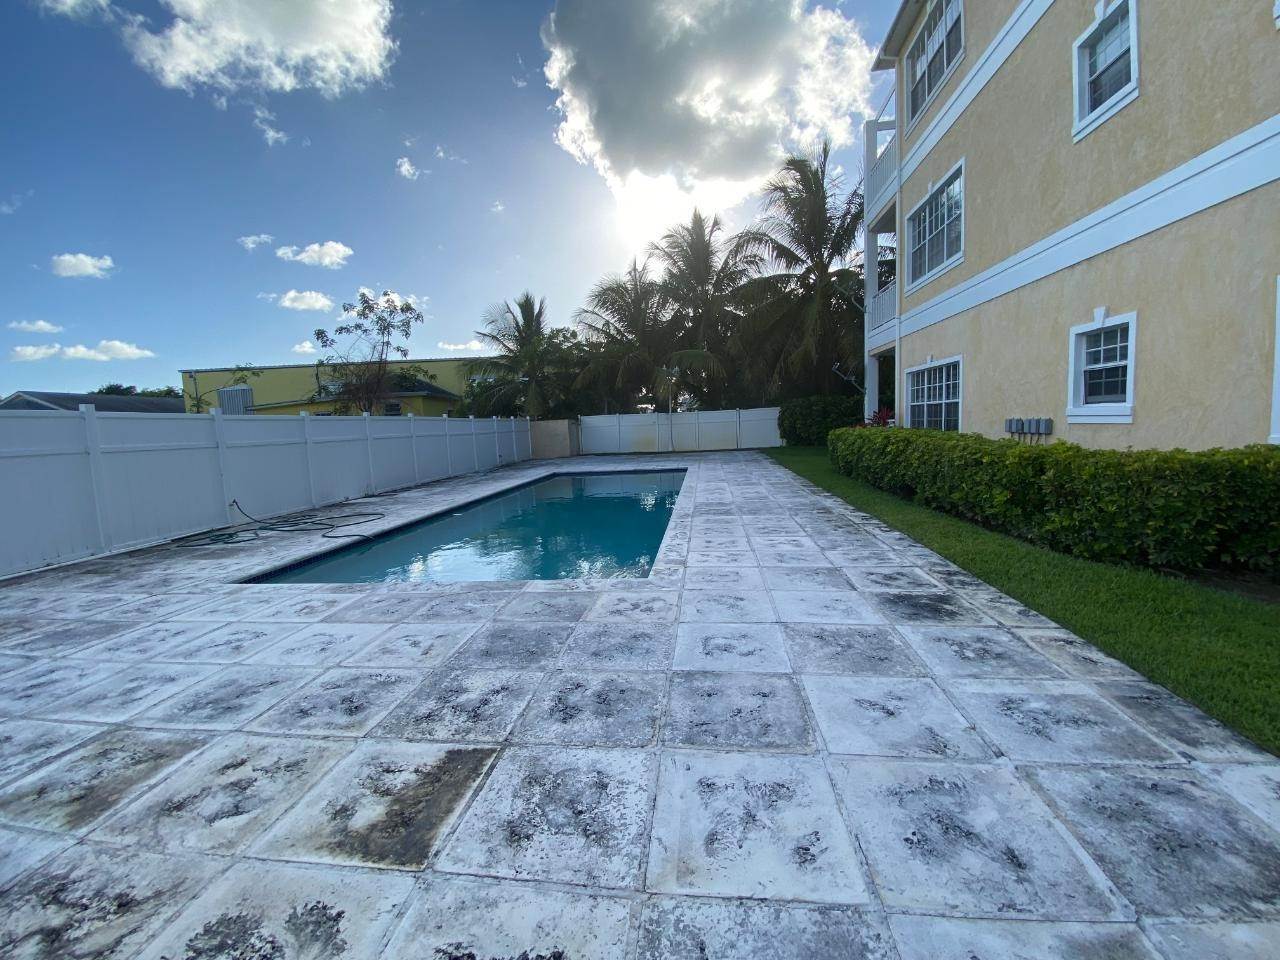 18. Condominiums at Other New Nassau and Paradise Island, Nassau and Paradise Island, Bahamas